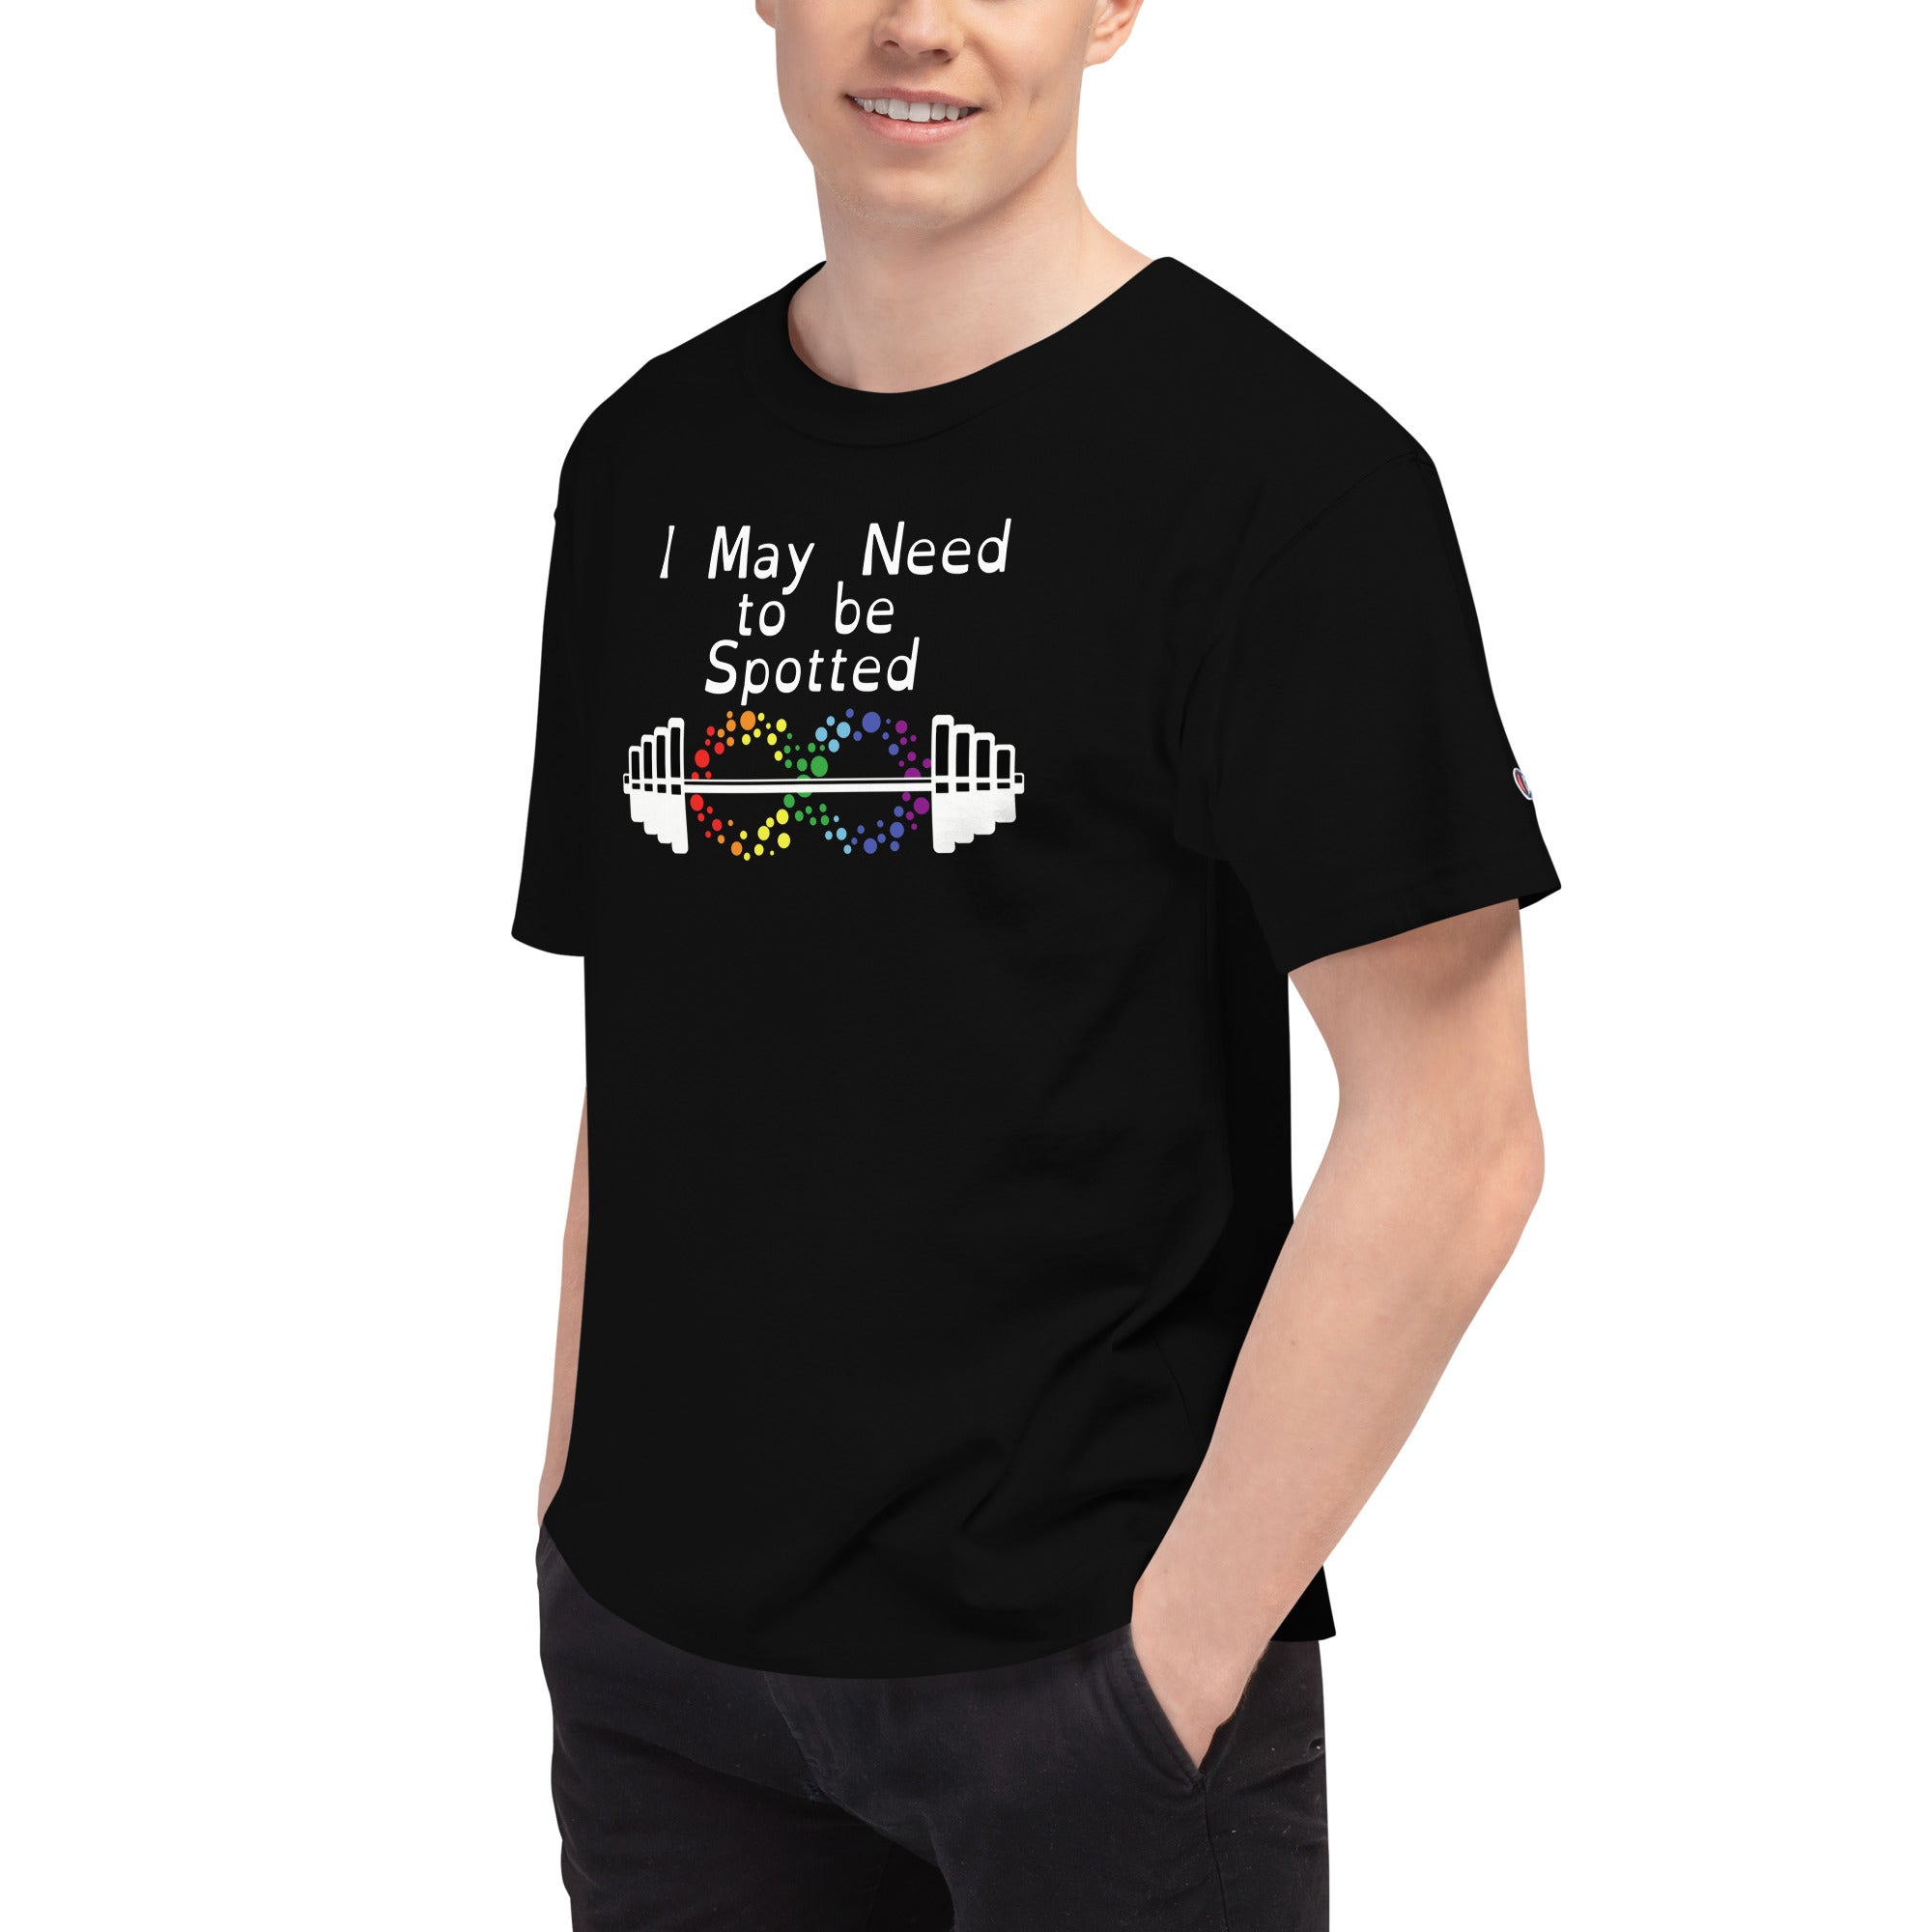 I May Need to be Spotted Men's Champion T-Shirt